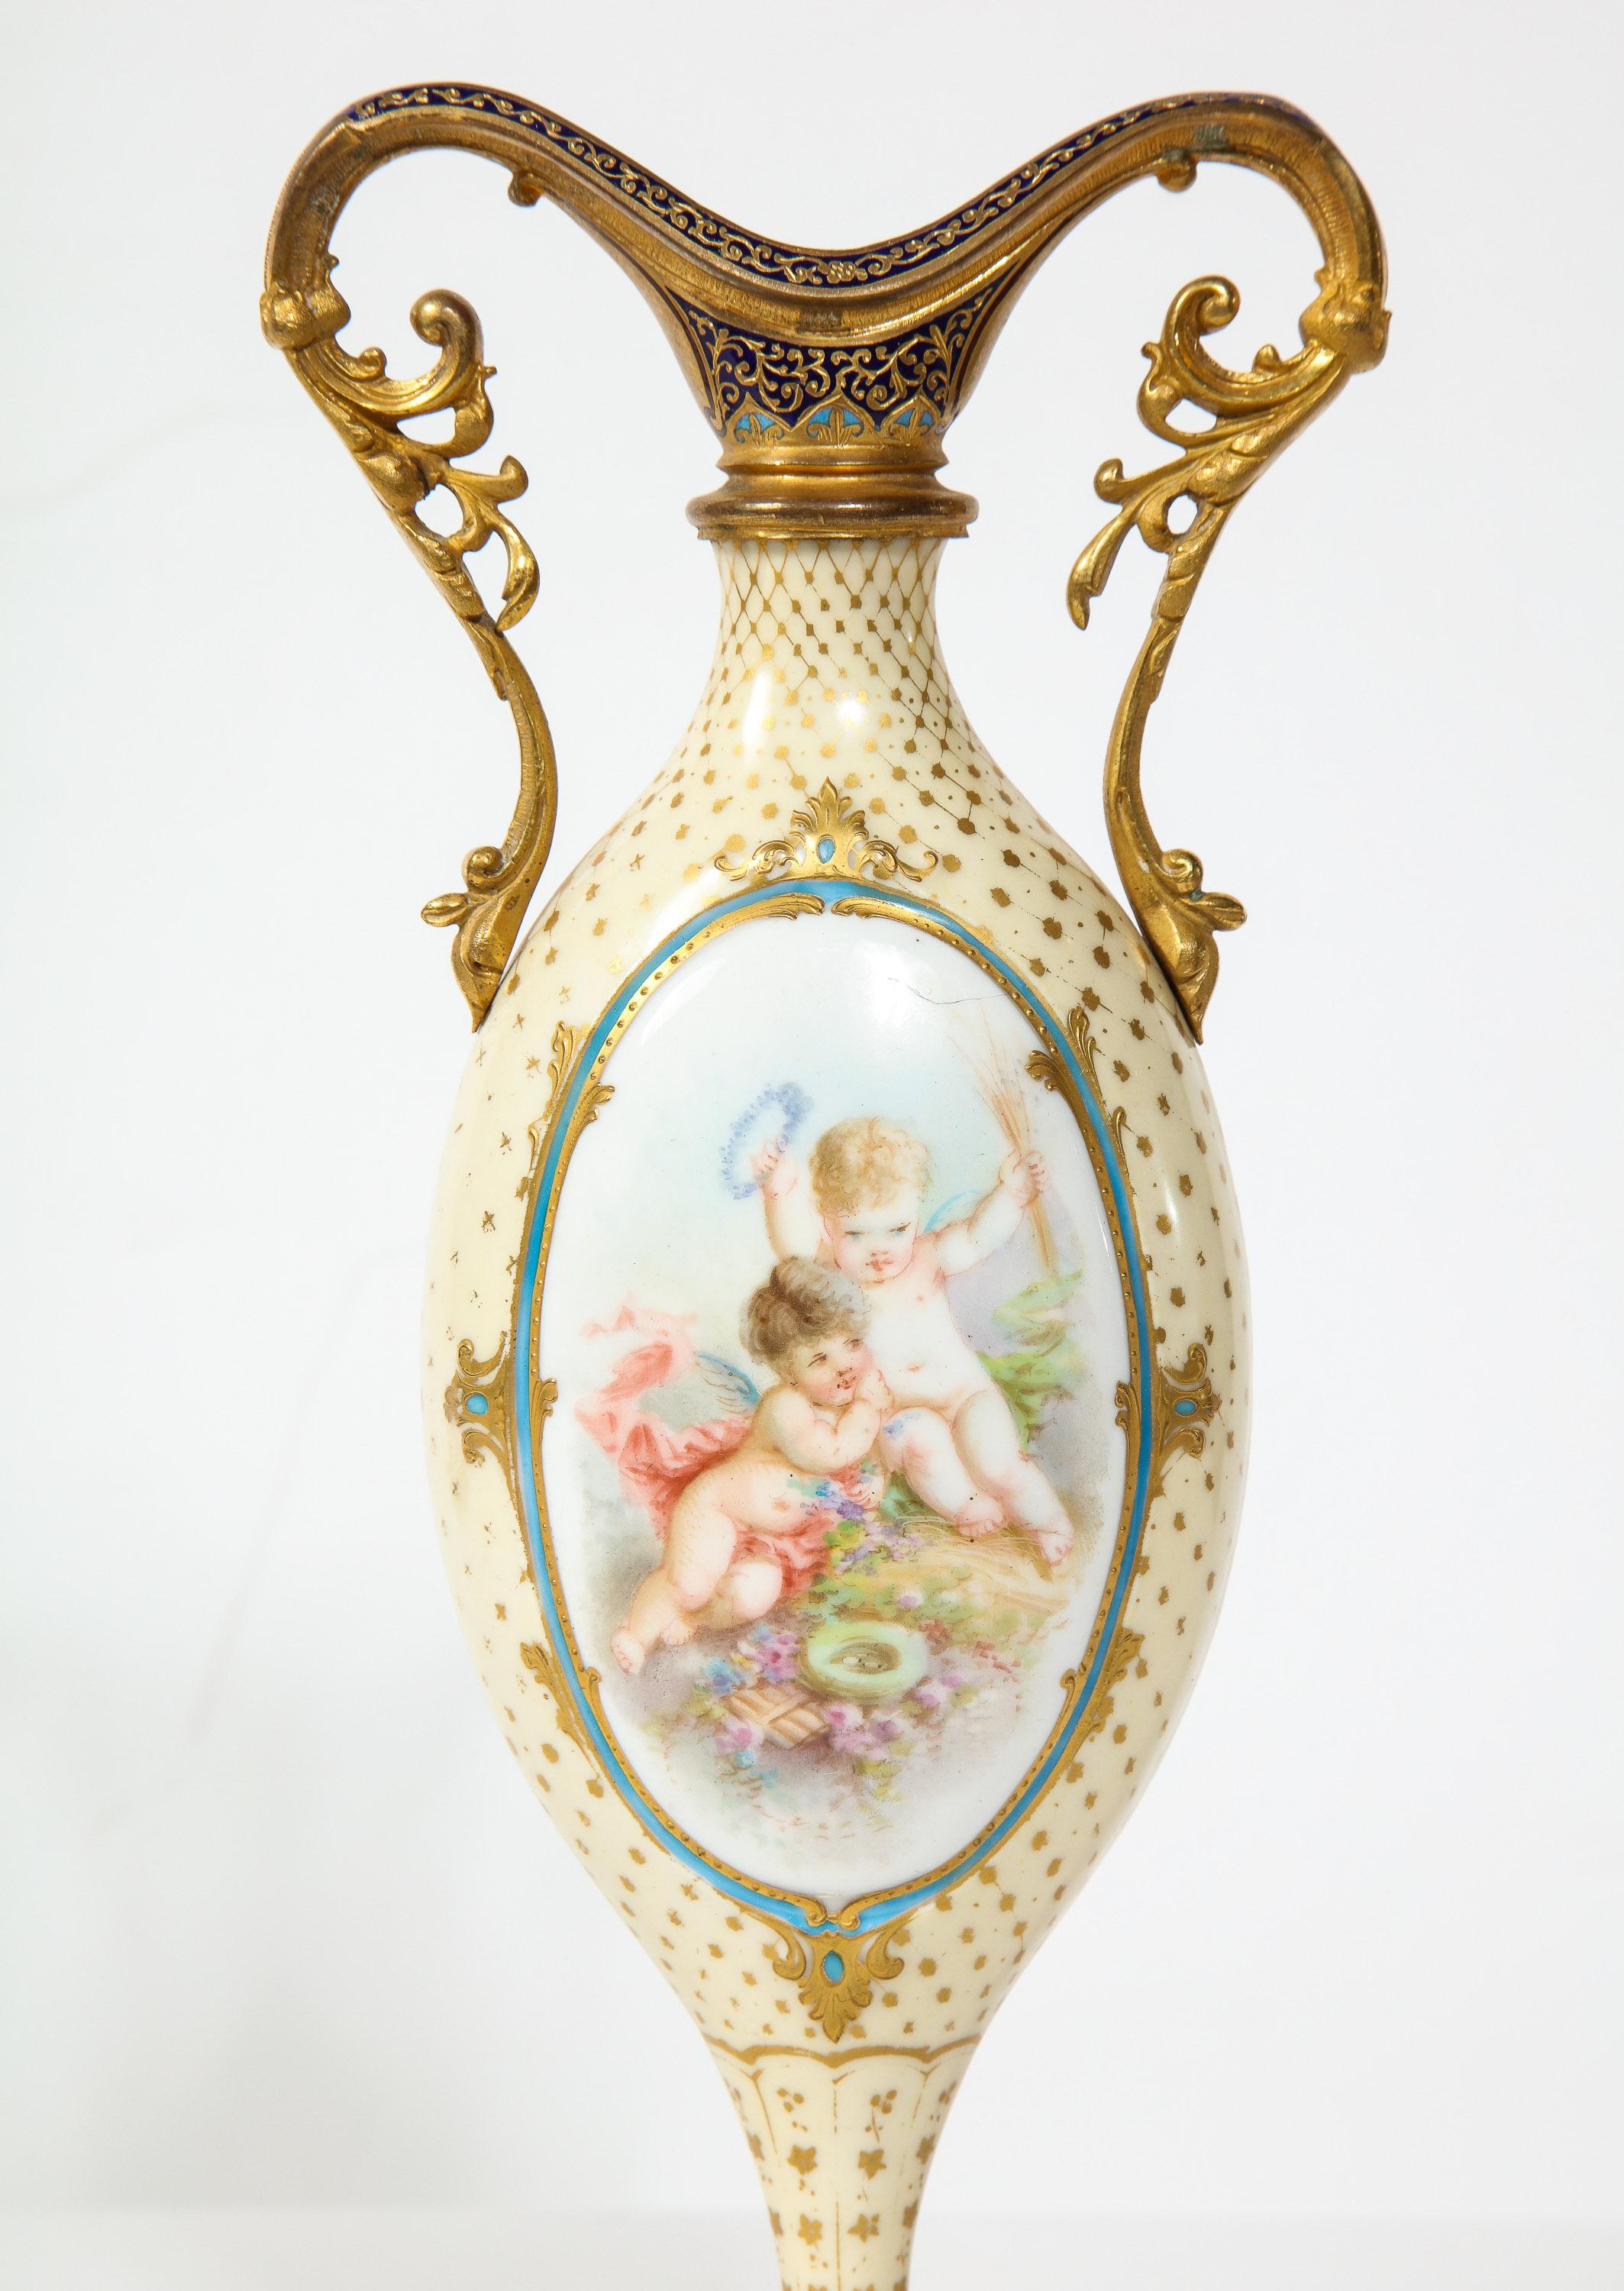 19th Century French Ormolu-Mounted White Sevres Porcelain and Champlevé Enamel Vase